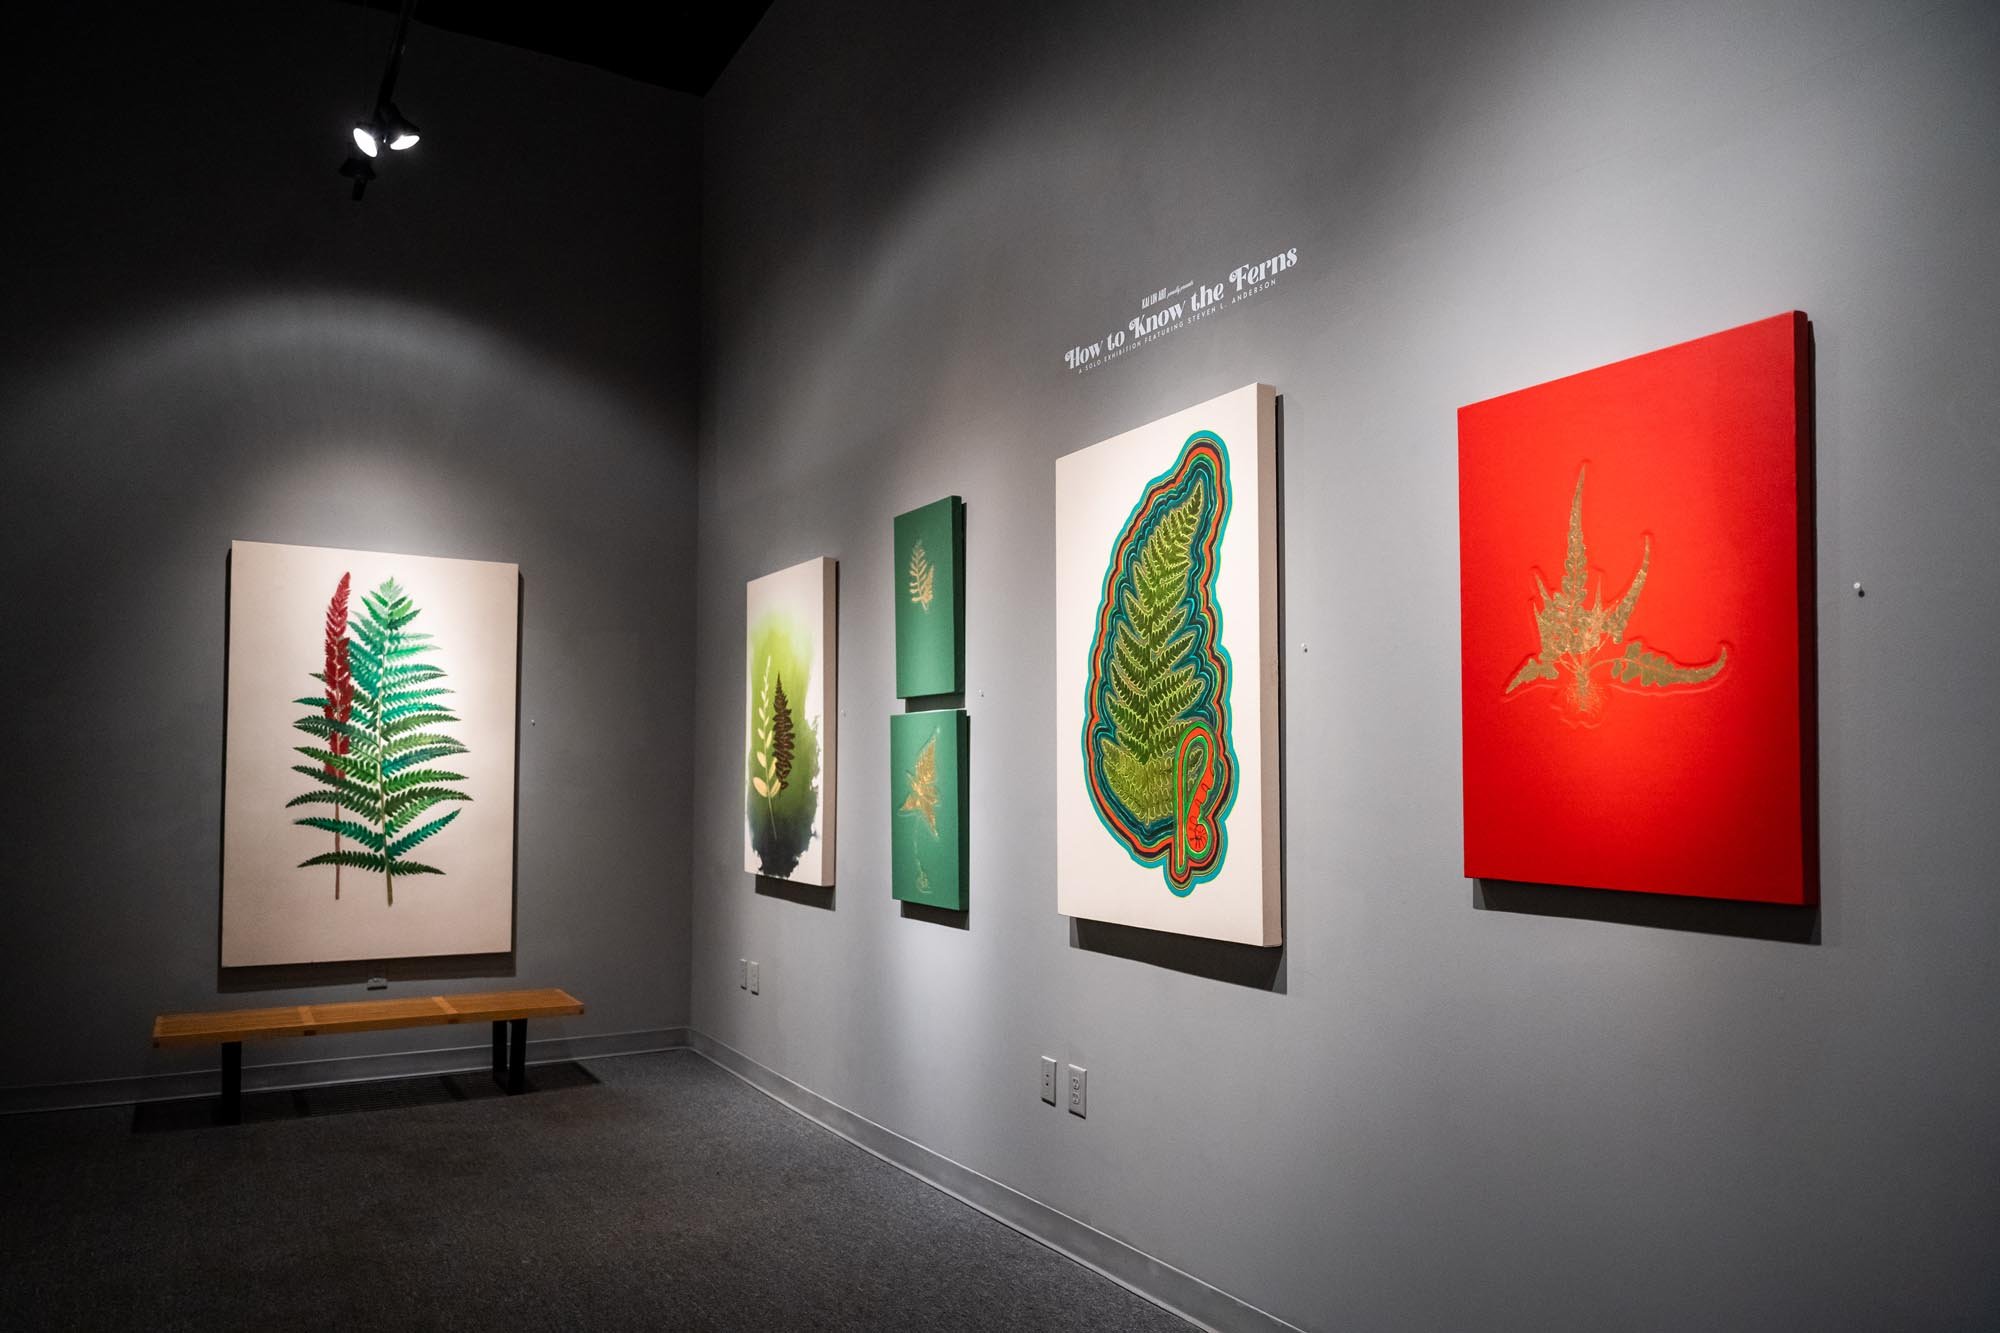   The Art of Steven L. Anderson  ”How to Know Ferns” now on exhibition  see more  